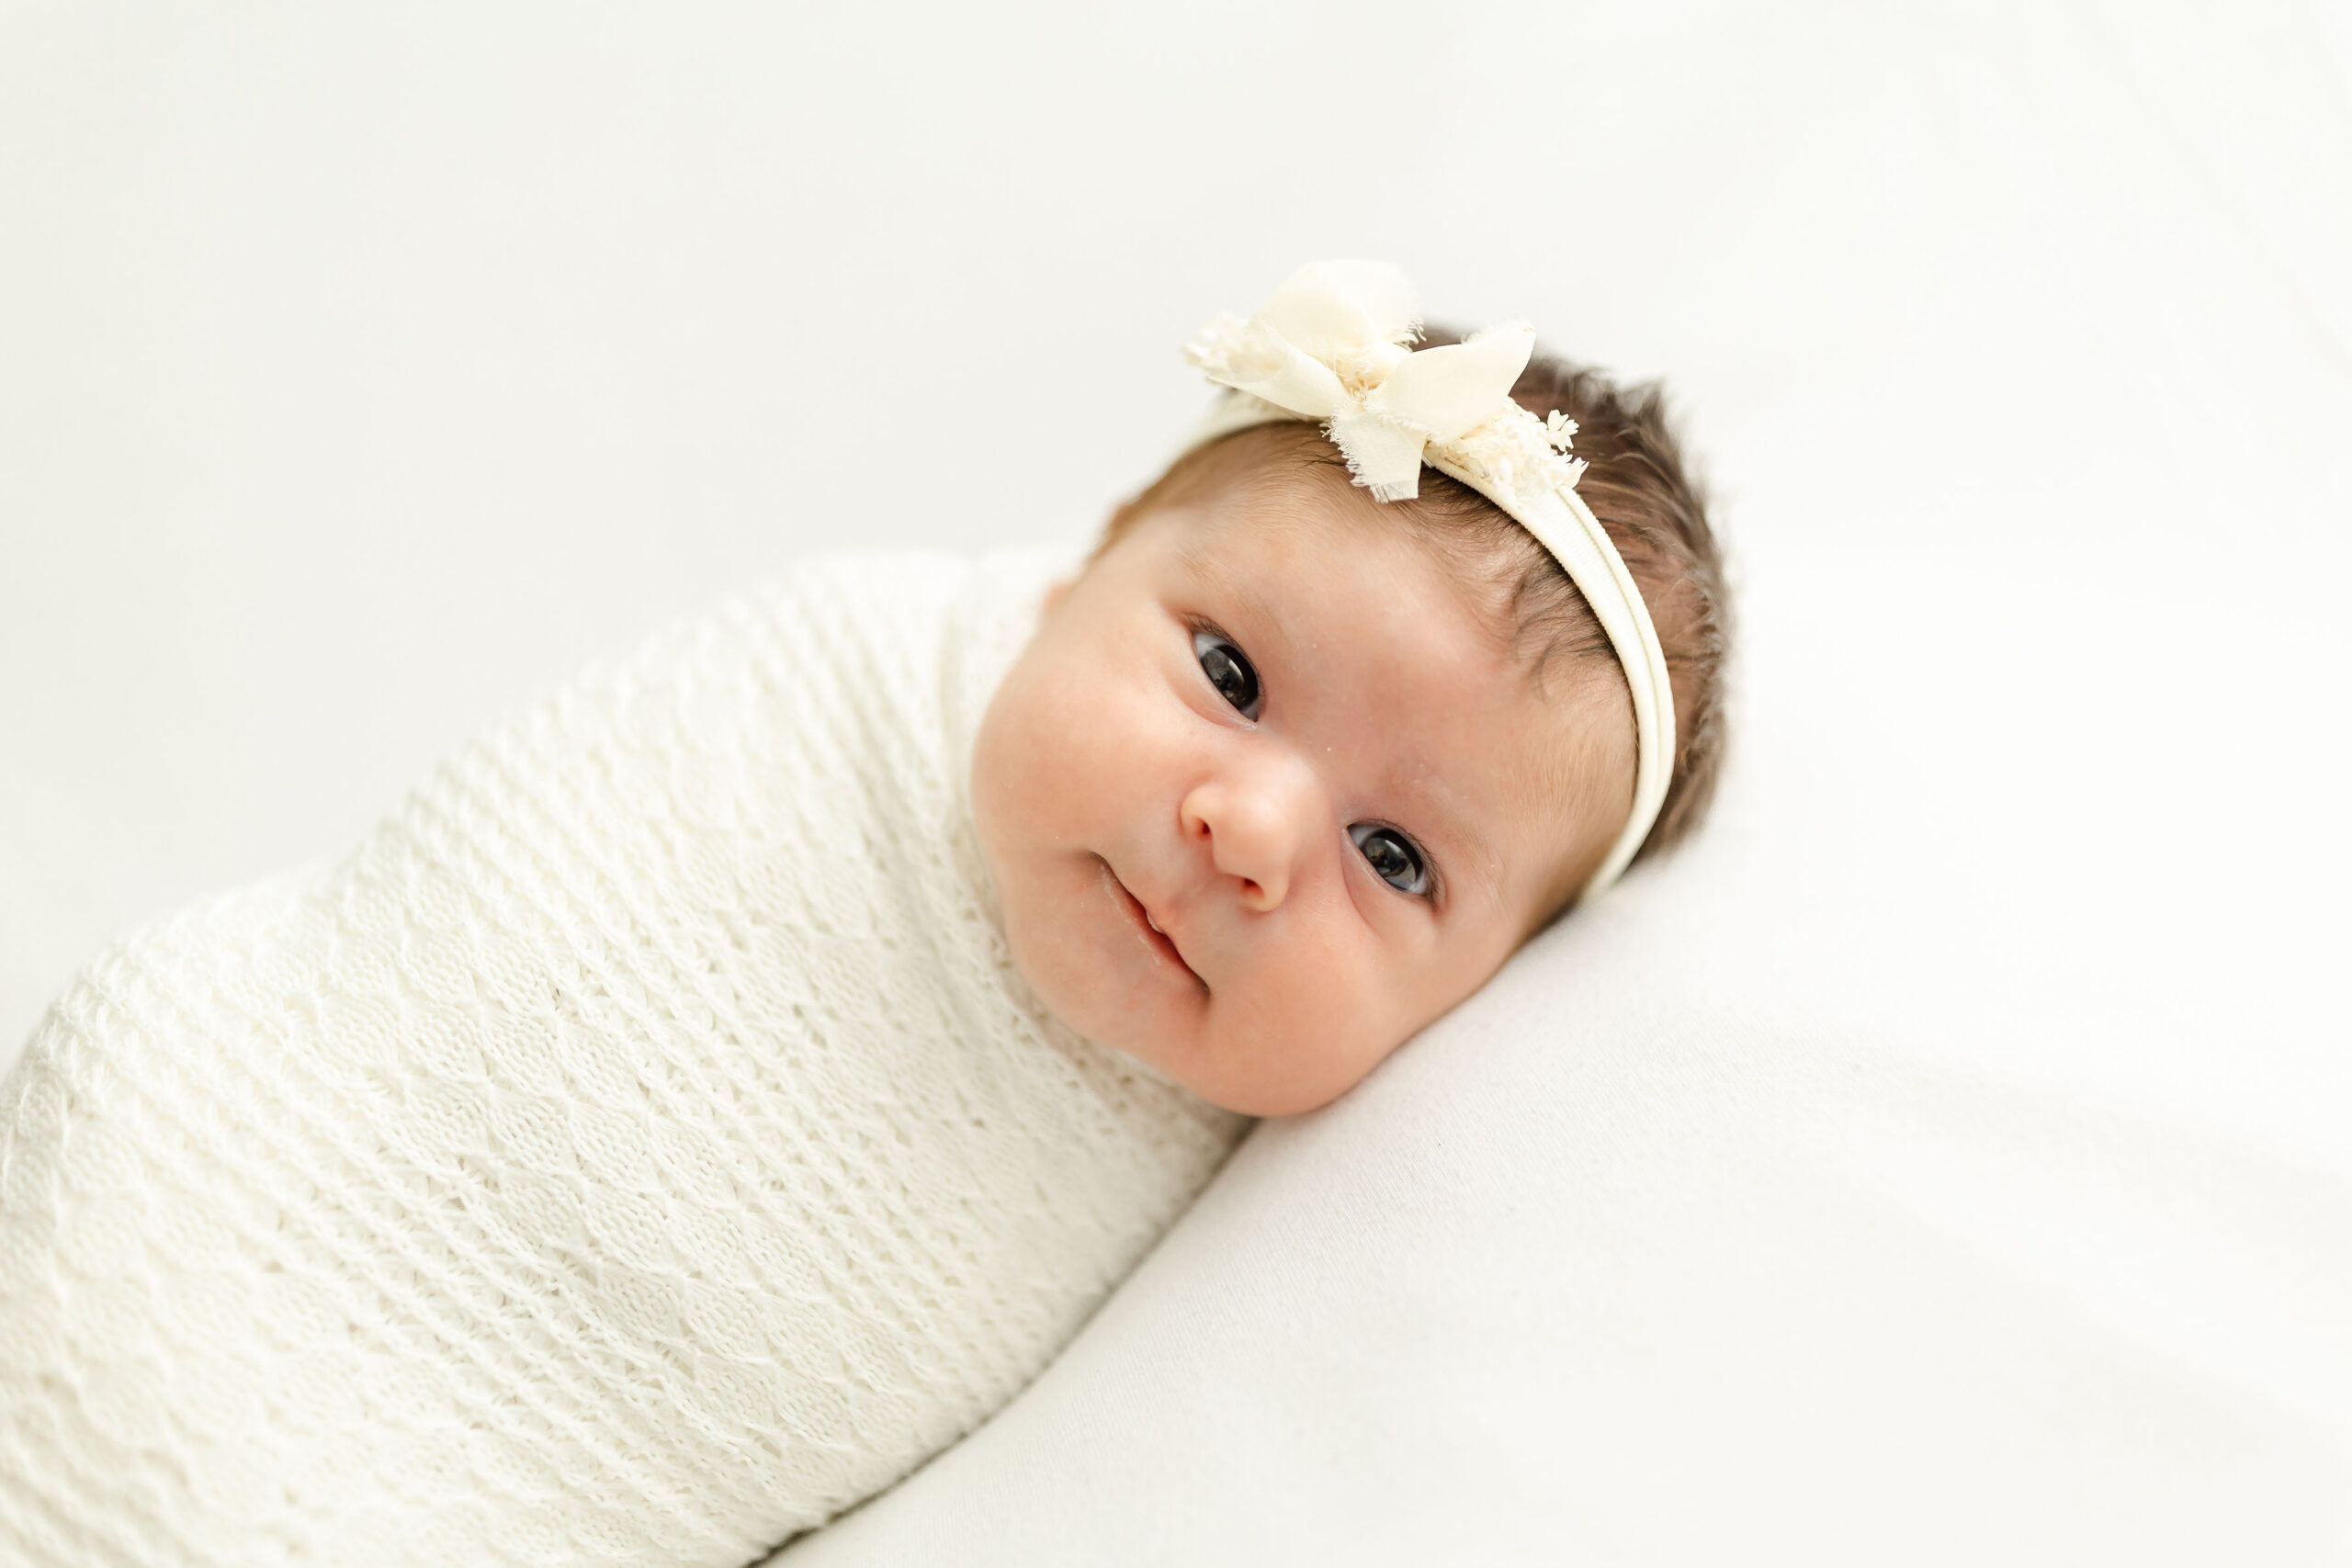 A newborn baby lays in a white lace swaddle and a white bow with eyes wide open